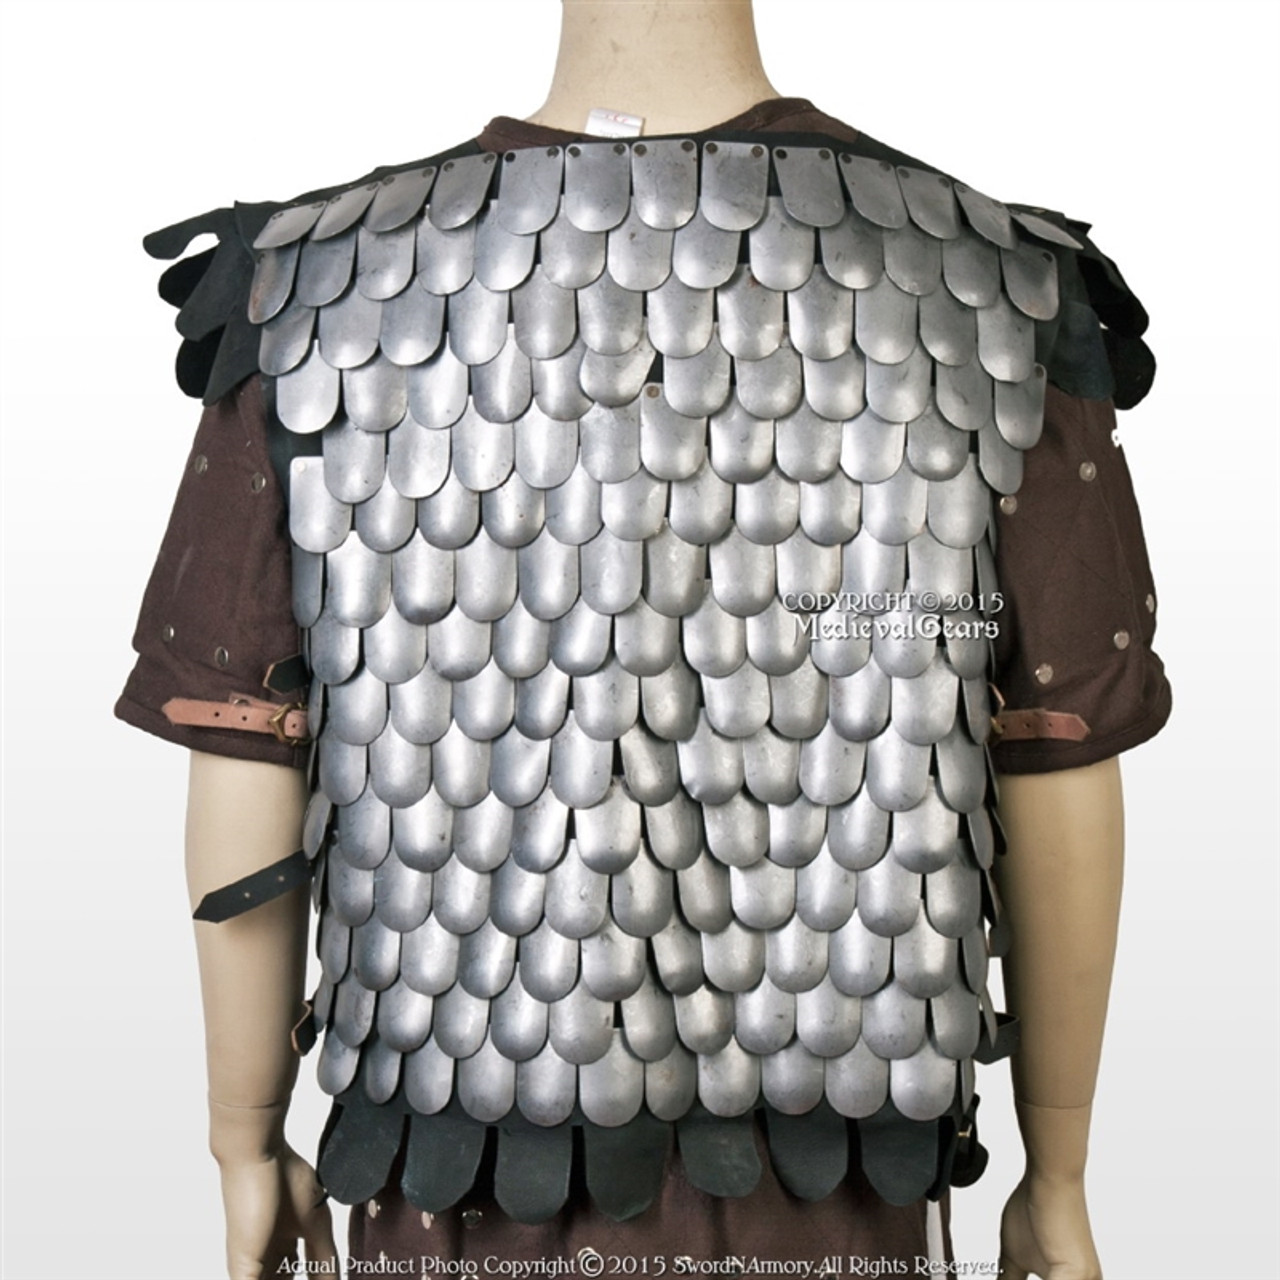 Medieval Scale Body Armor 20G Steel with Leather Liner LARP Costume M/L/XL